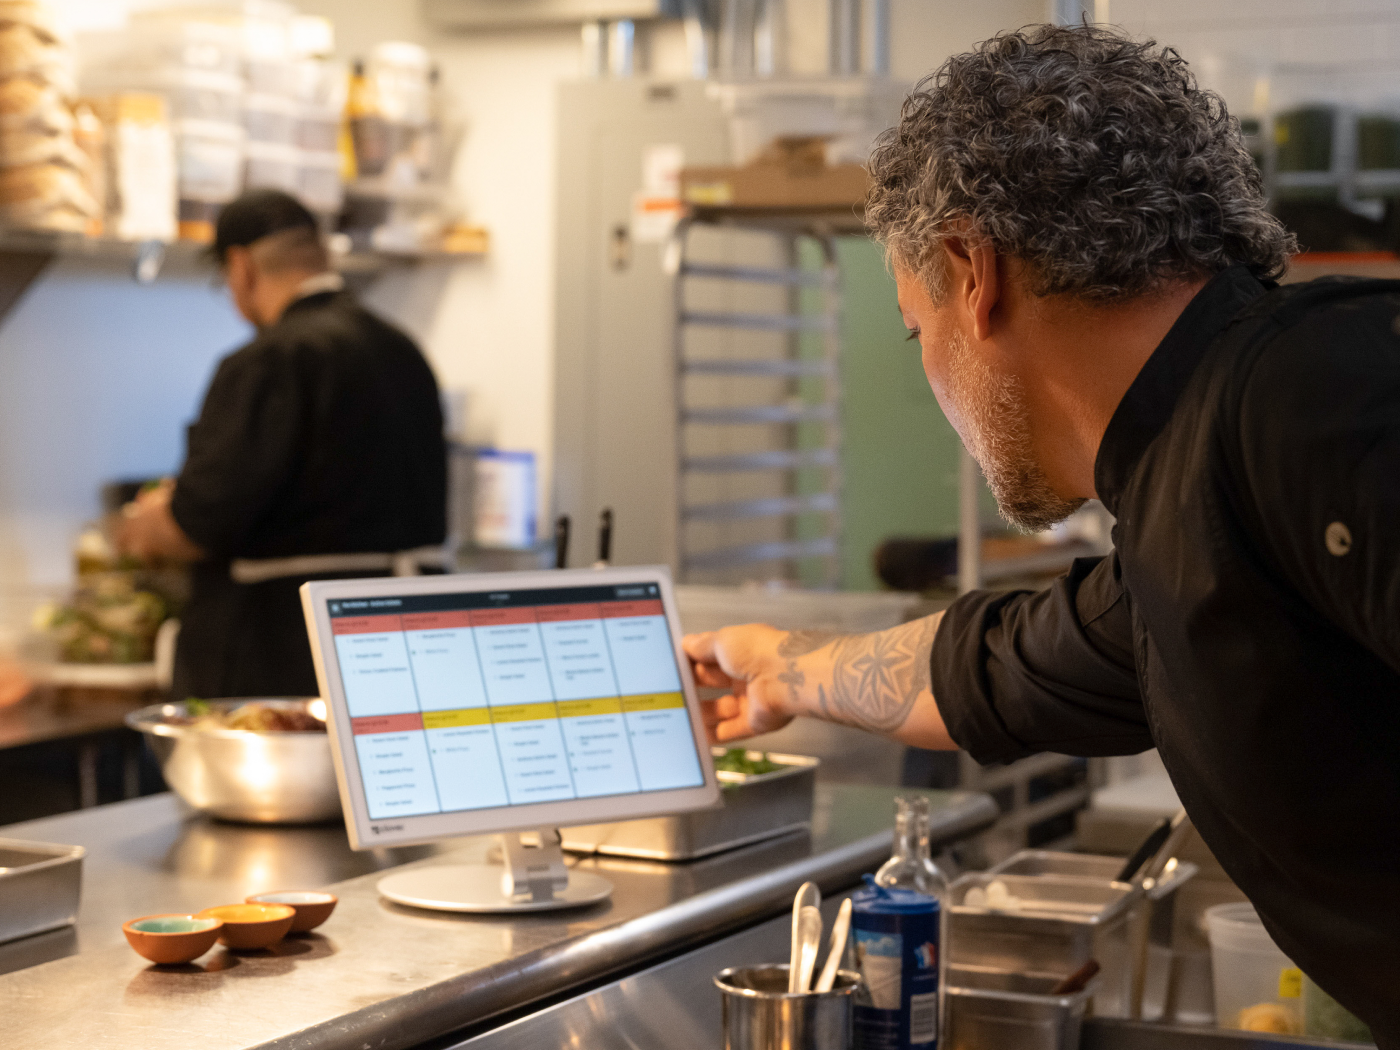 5 Reasons Every Restaurant Needs Clover Kitchen Display System